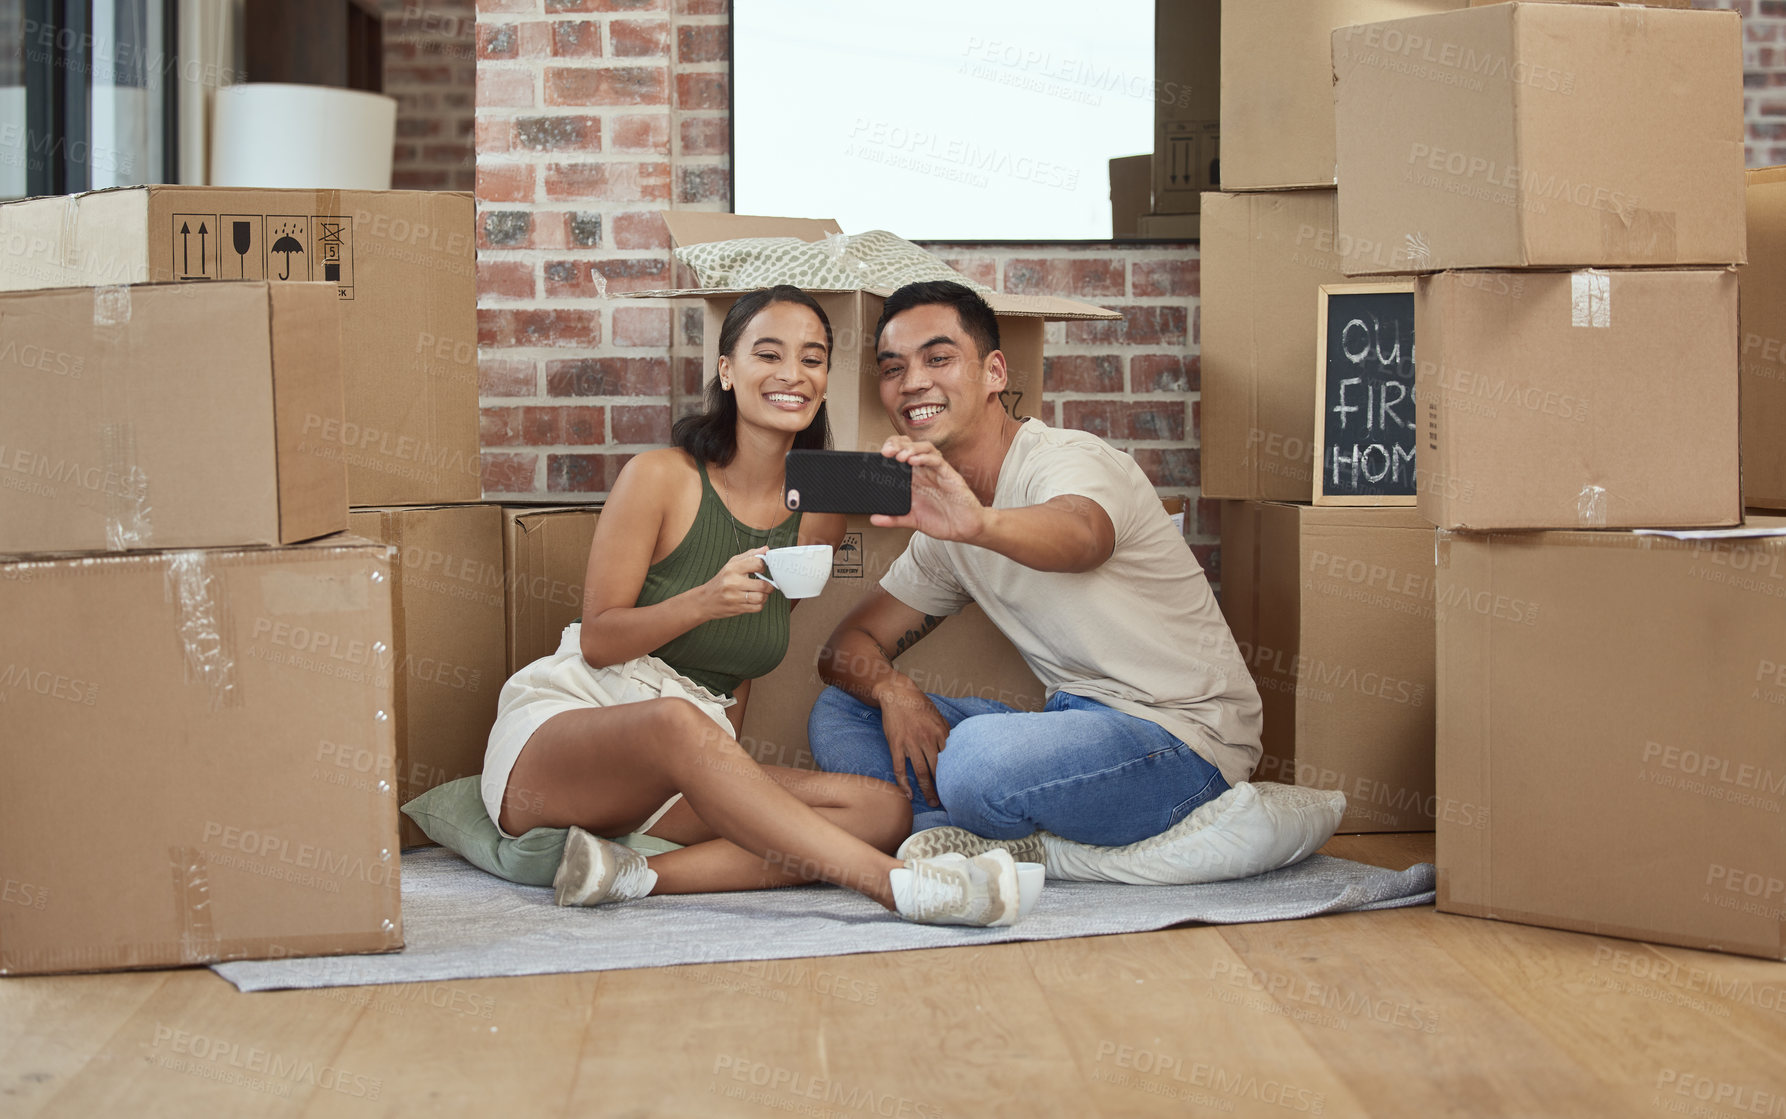 Buy stock photo Shot of a young couple taking a selfie while sitting in their new home